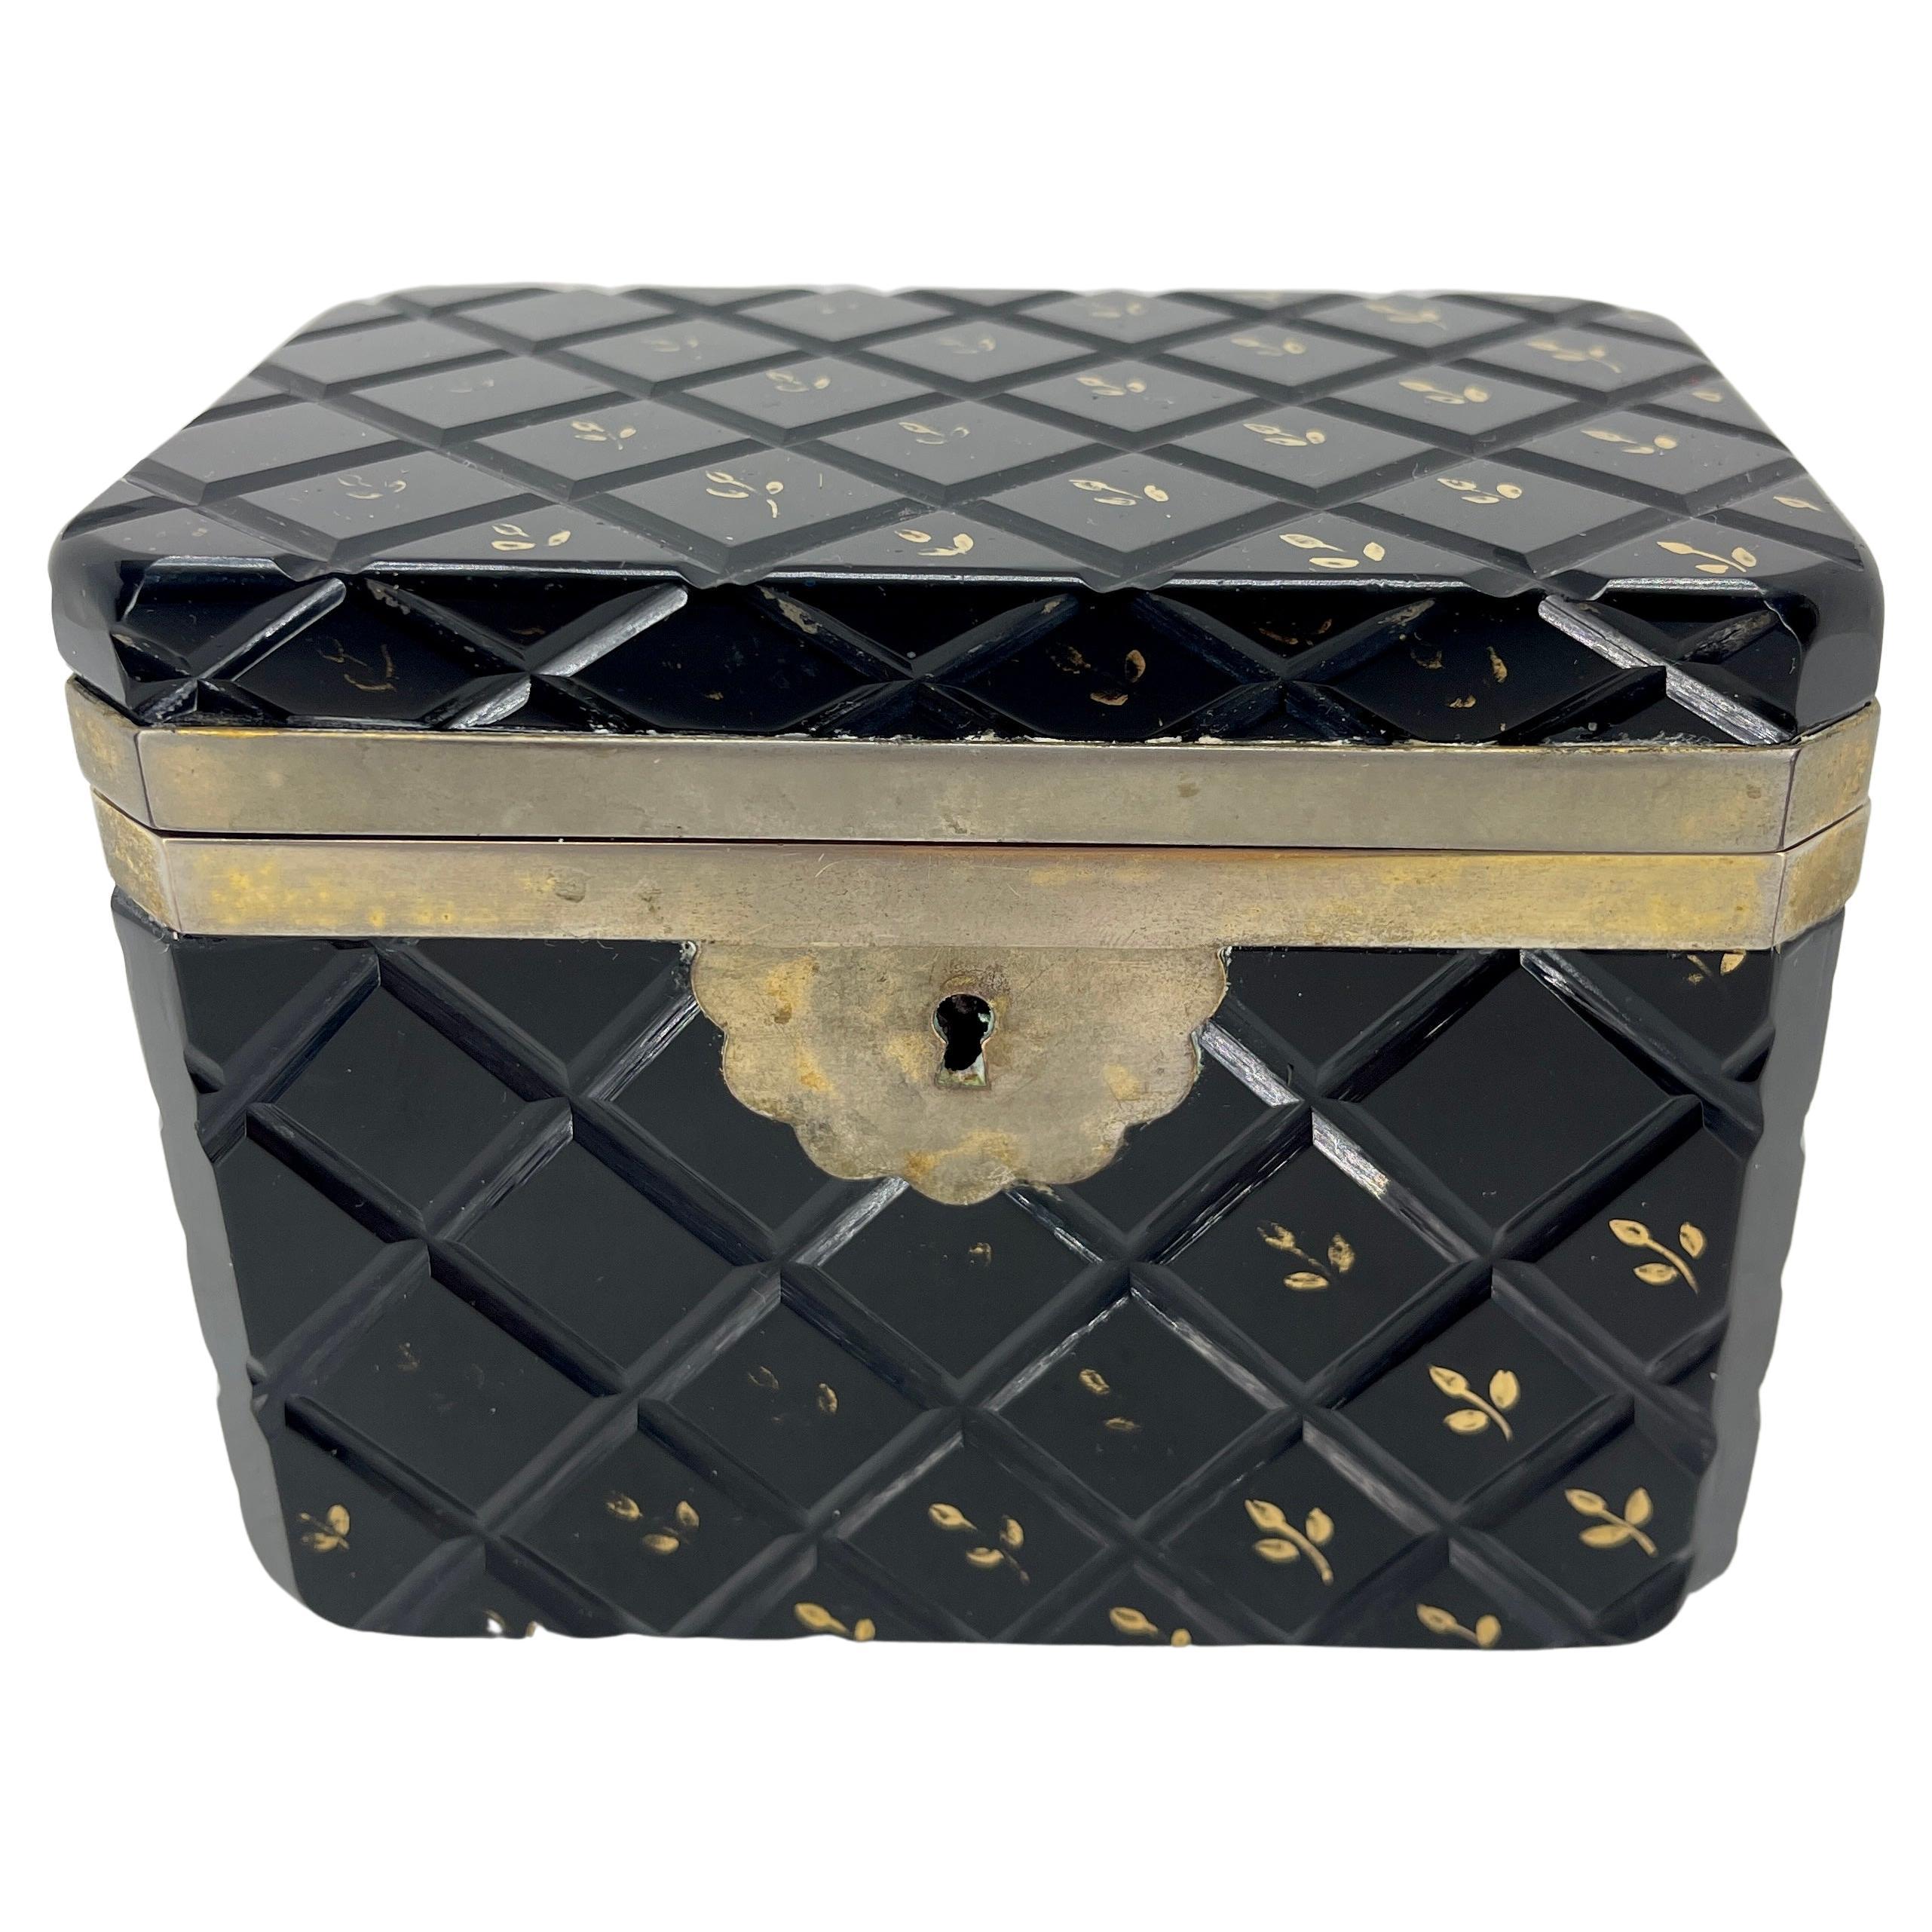 Black opaline glass jewelry box with cut diamond pattern and original brass hardware. The box is also decorated with gold leaves.